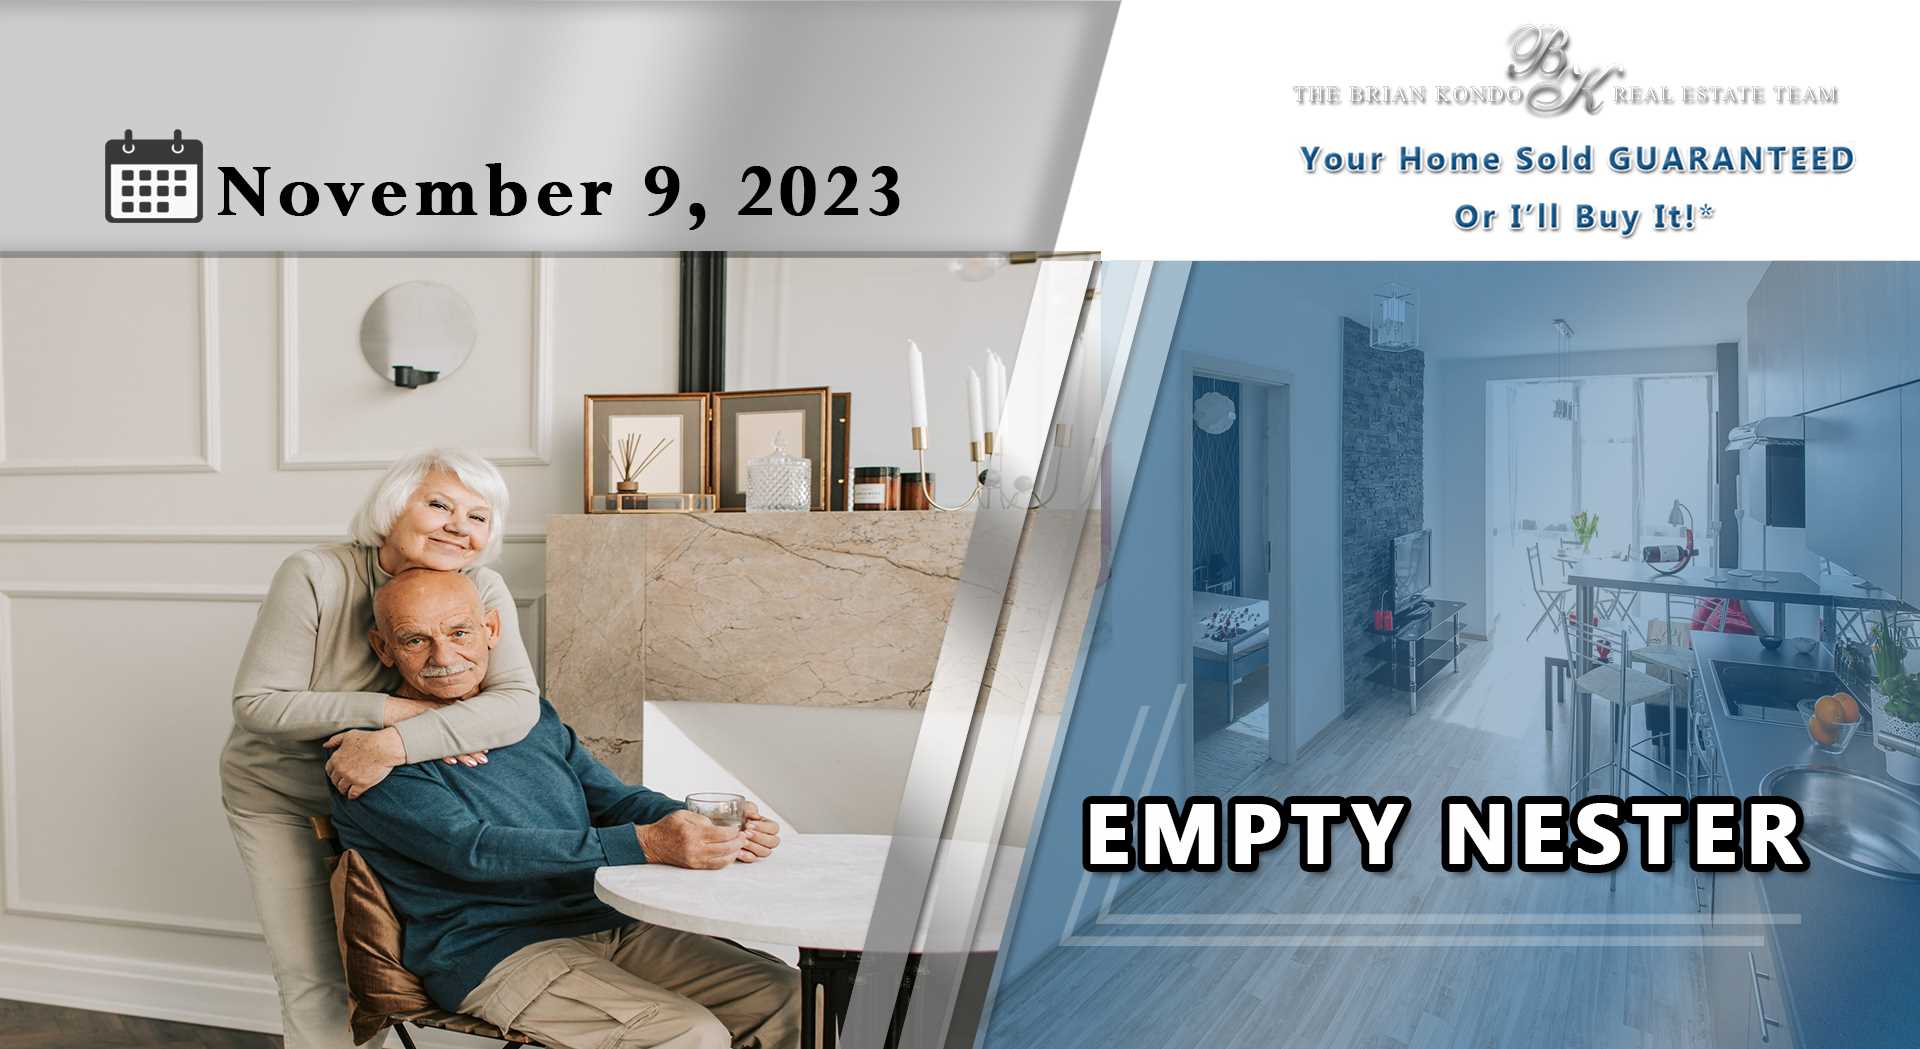 EMPTY NESTERS: FREE Special Report Reveals 9 Costly Mistakes to Avoid When Selling Your Home